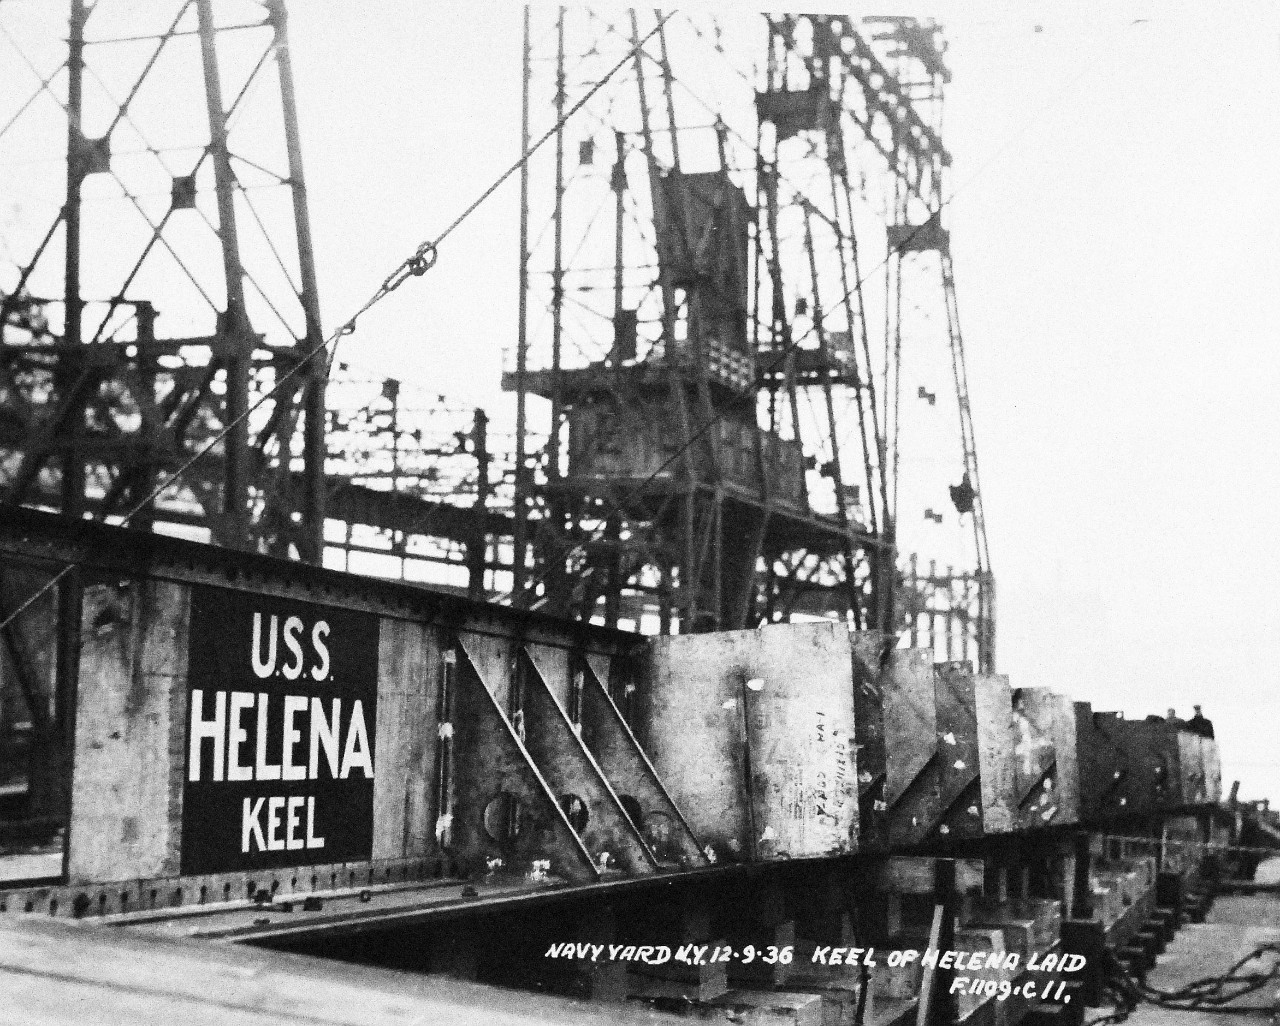 19-LC-23174:  USS Helena (CL-50), December 1936.    The cruiser is at the New York (also known as Brooklyn) Navy Yard, New York City, New York, showing the keel being laid, December 9, 1936.    Official Bureau of Ships Photograph, now in the collections of the National Archives.   (2015/2/18). 